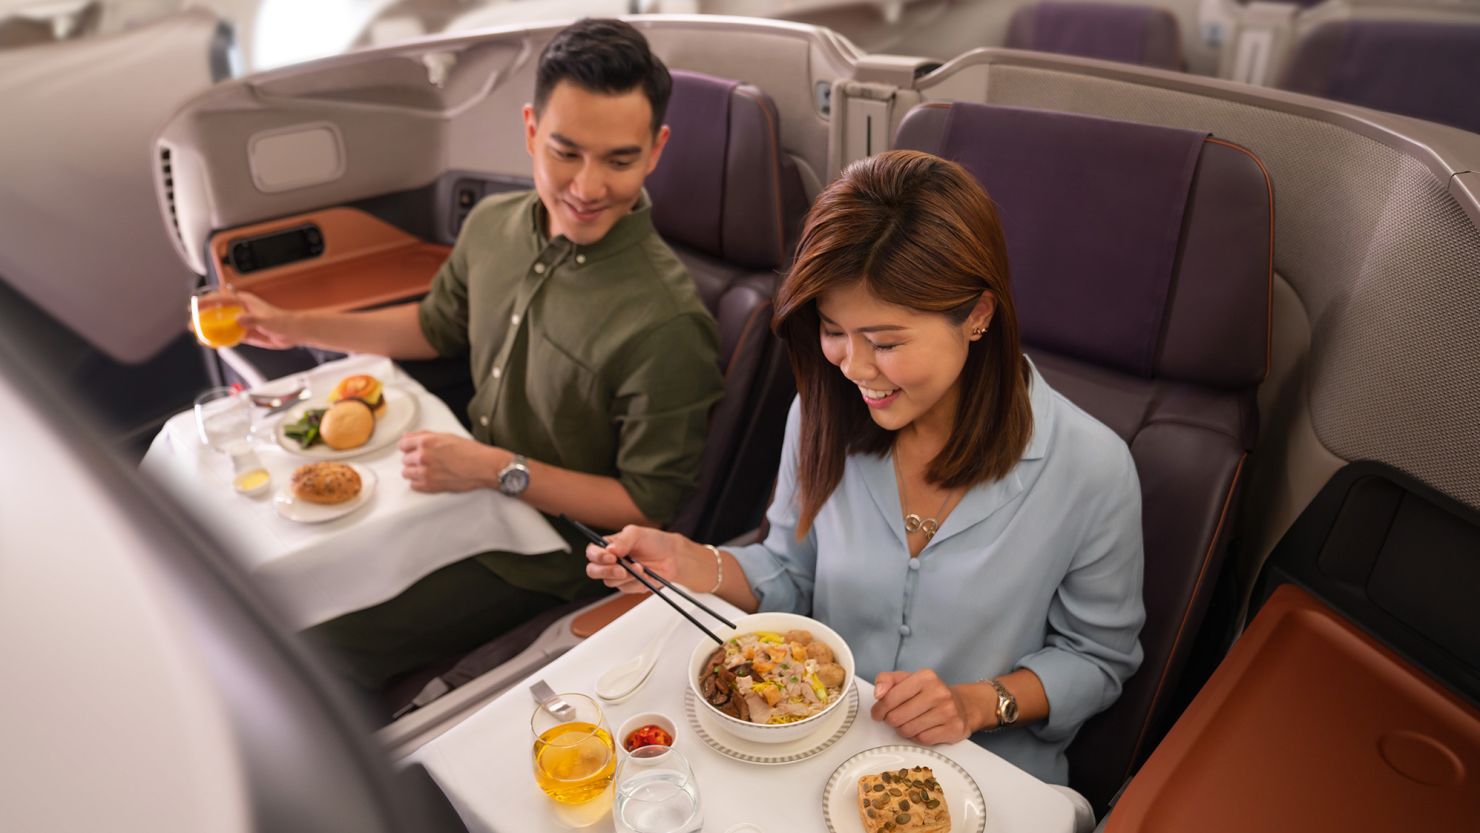 The unique restaurant is a dining experience on board an A380, the biggest passenger plane in the world.